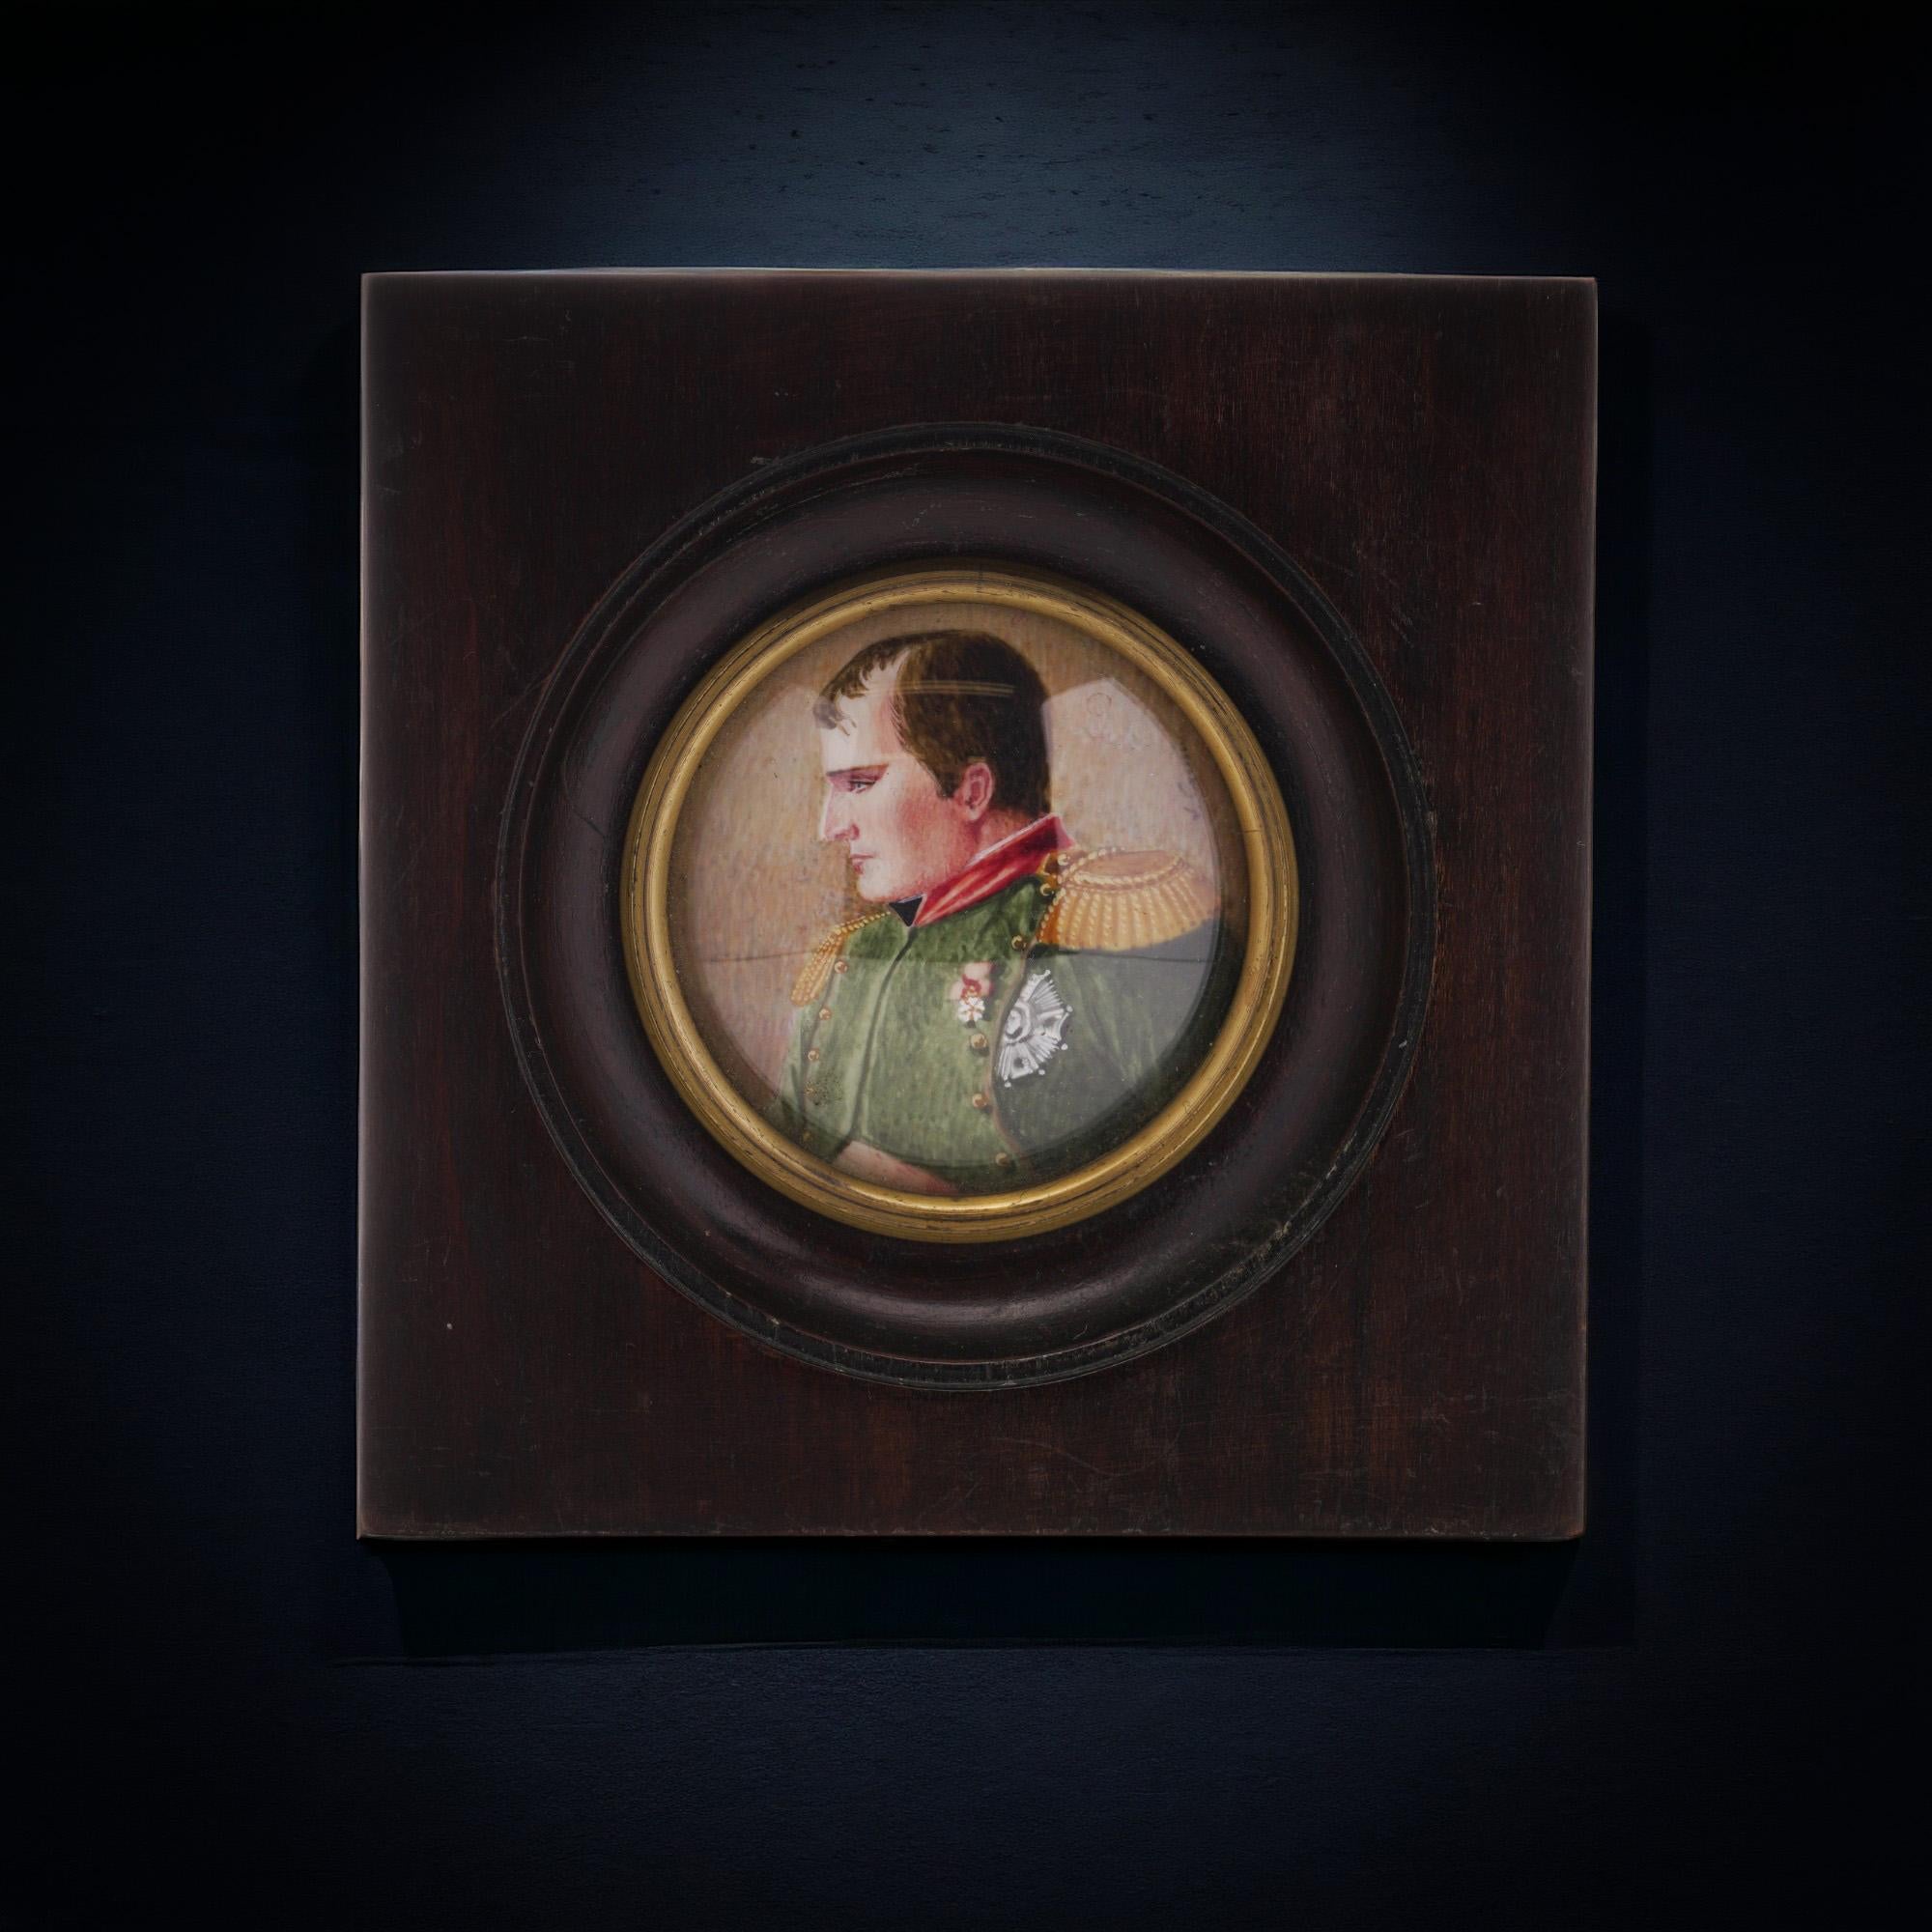 Antique 19th-century mahogany wood-framed hand-painted watercolour miniature portrait of Napoleon I. 
The miniature depicts a Napoleon I portrait turning his face to the right.
The back has not been opened to inspect. 
The signature is on the lower